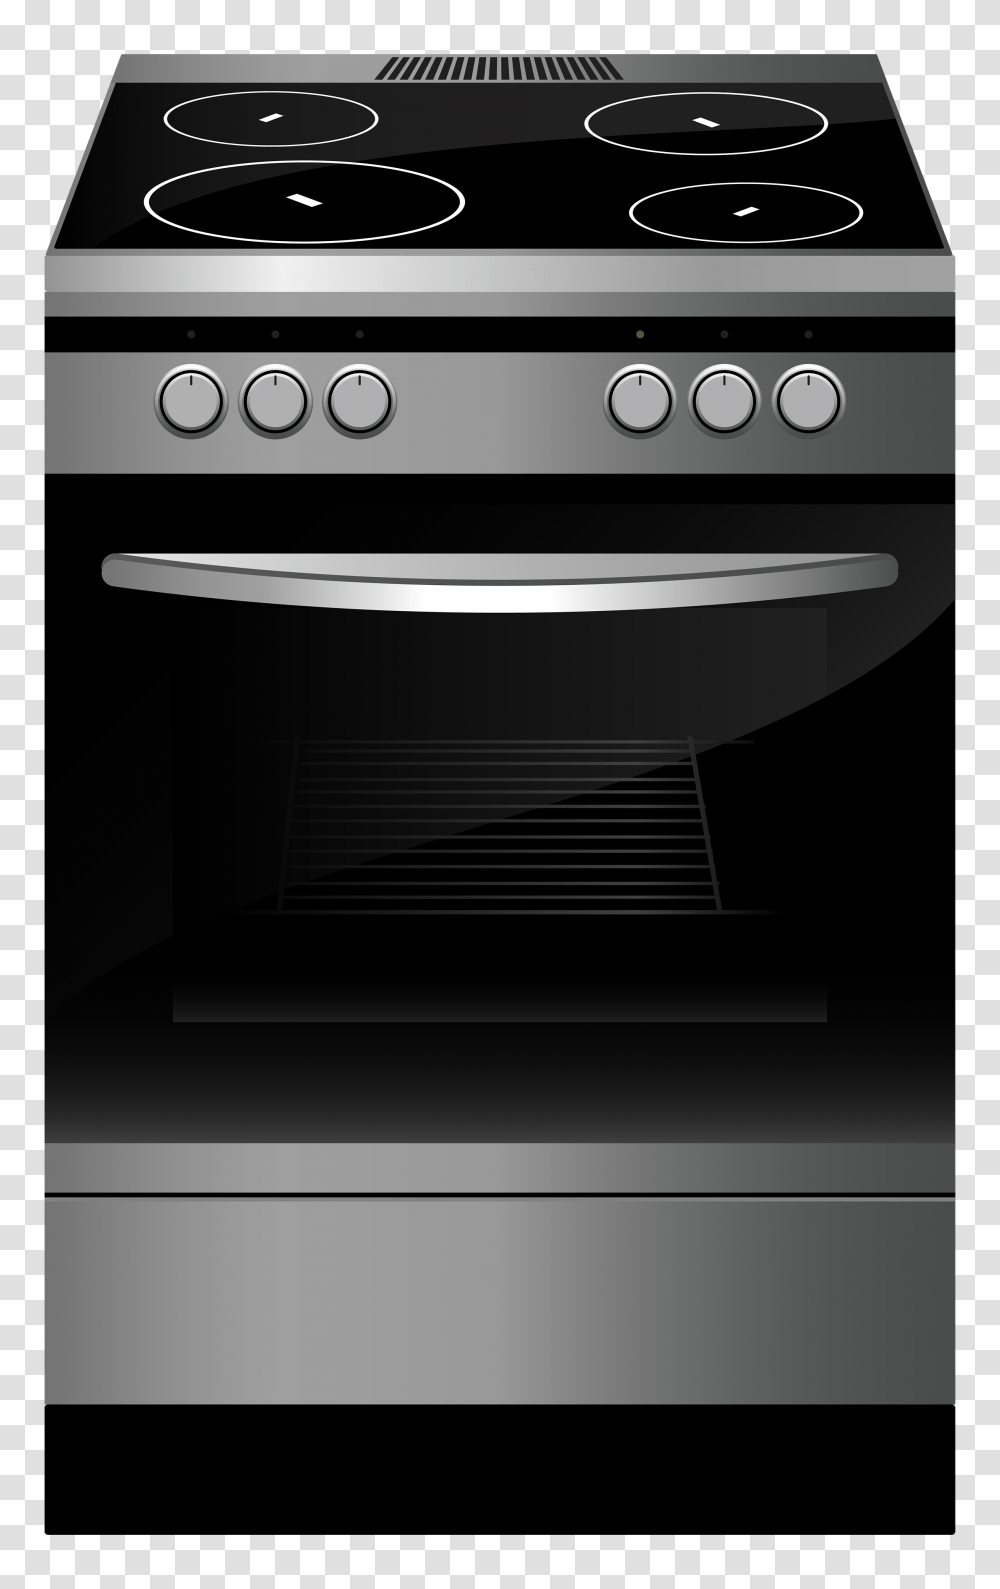 Stove, Tableware, Oven, Appliance, Cooktop Transparent Png